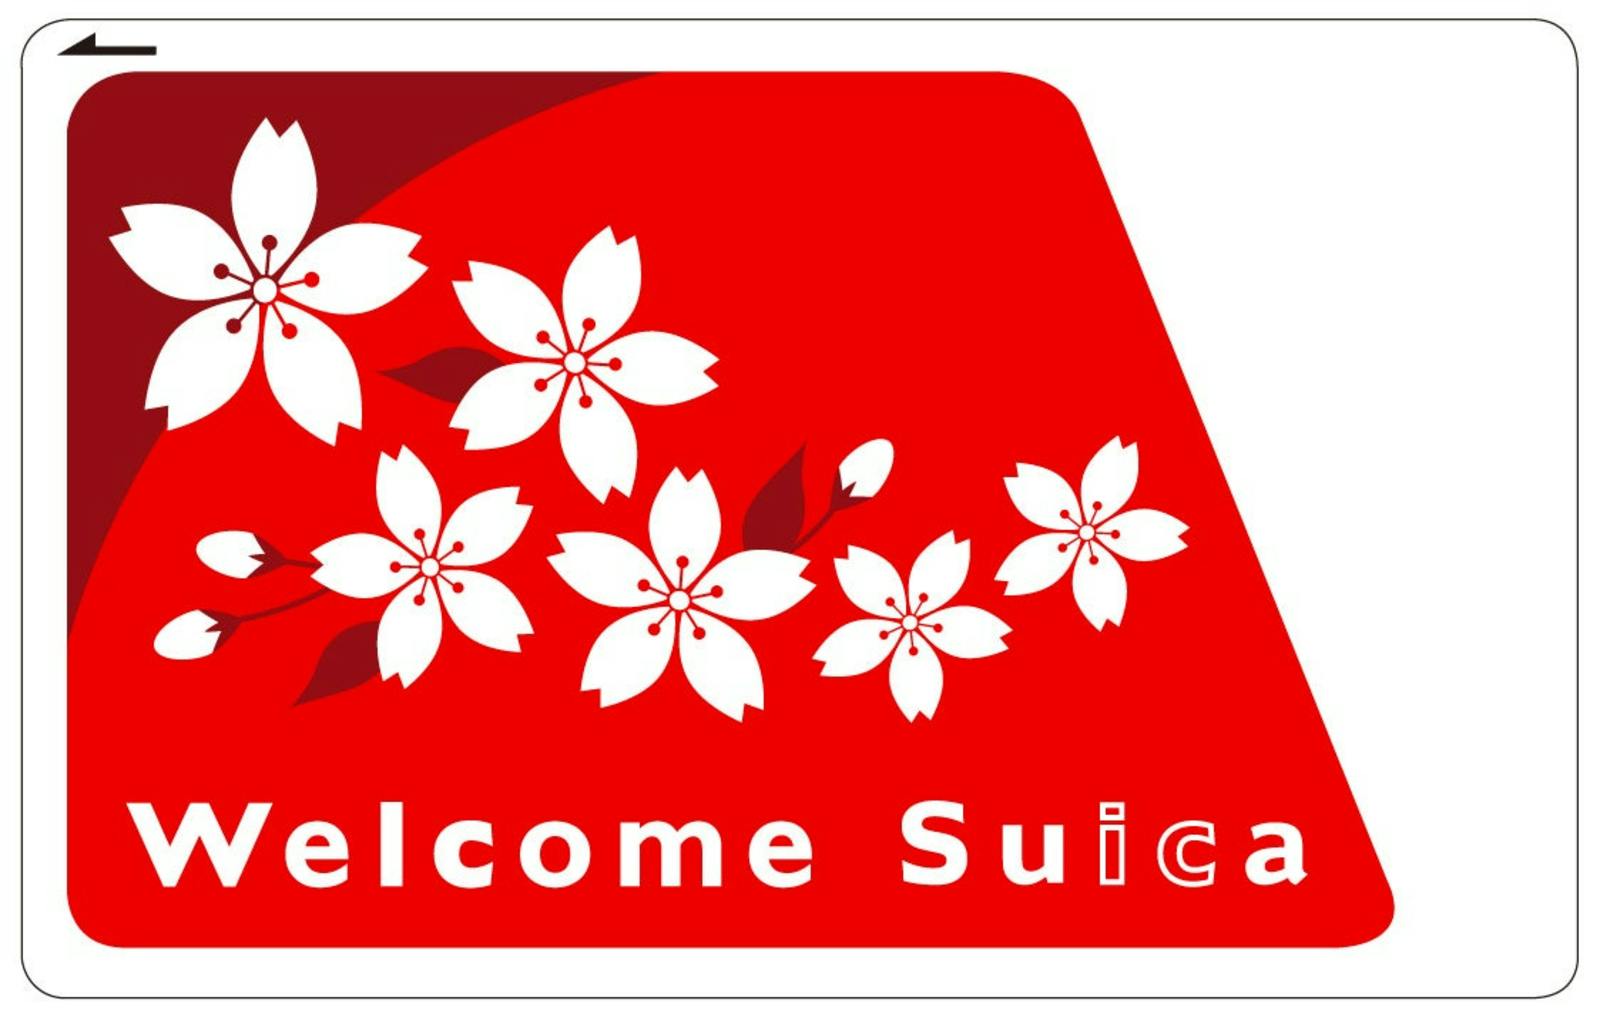 ▲Welcome Suica：Klook（クルック）プレスリリースより